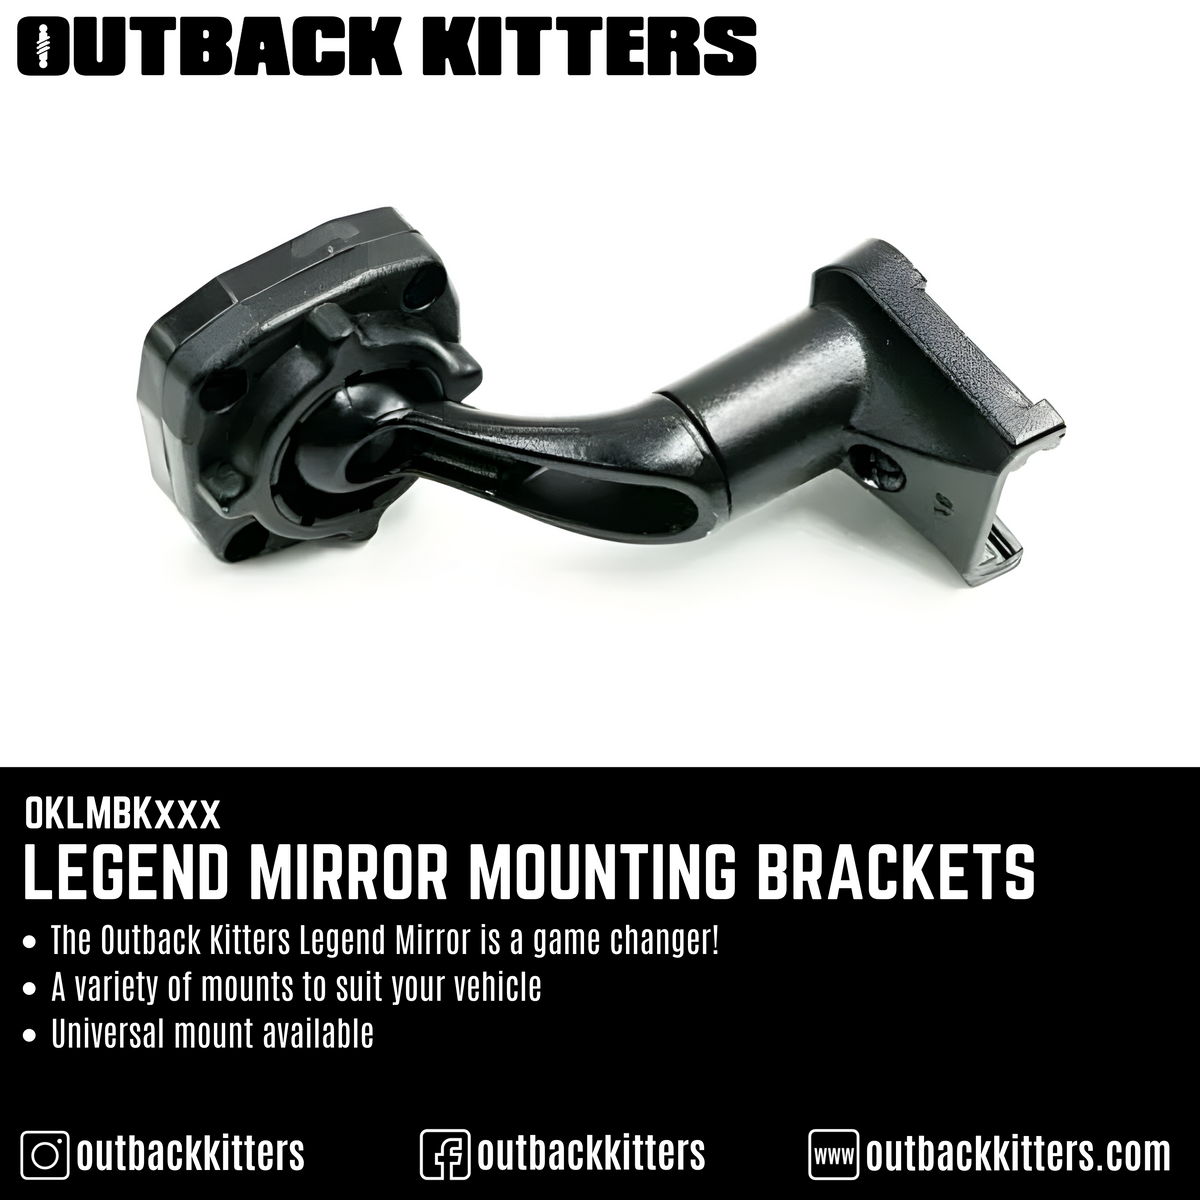 Outback Kitters Legend Mirror Mounting Brackets - Outback Kitters